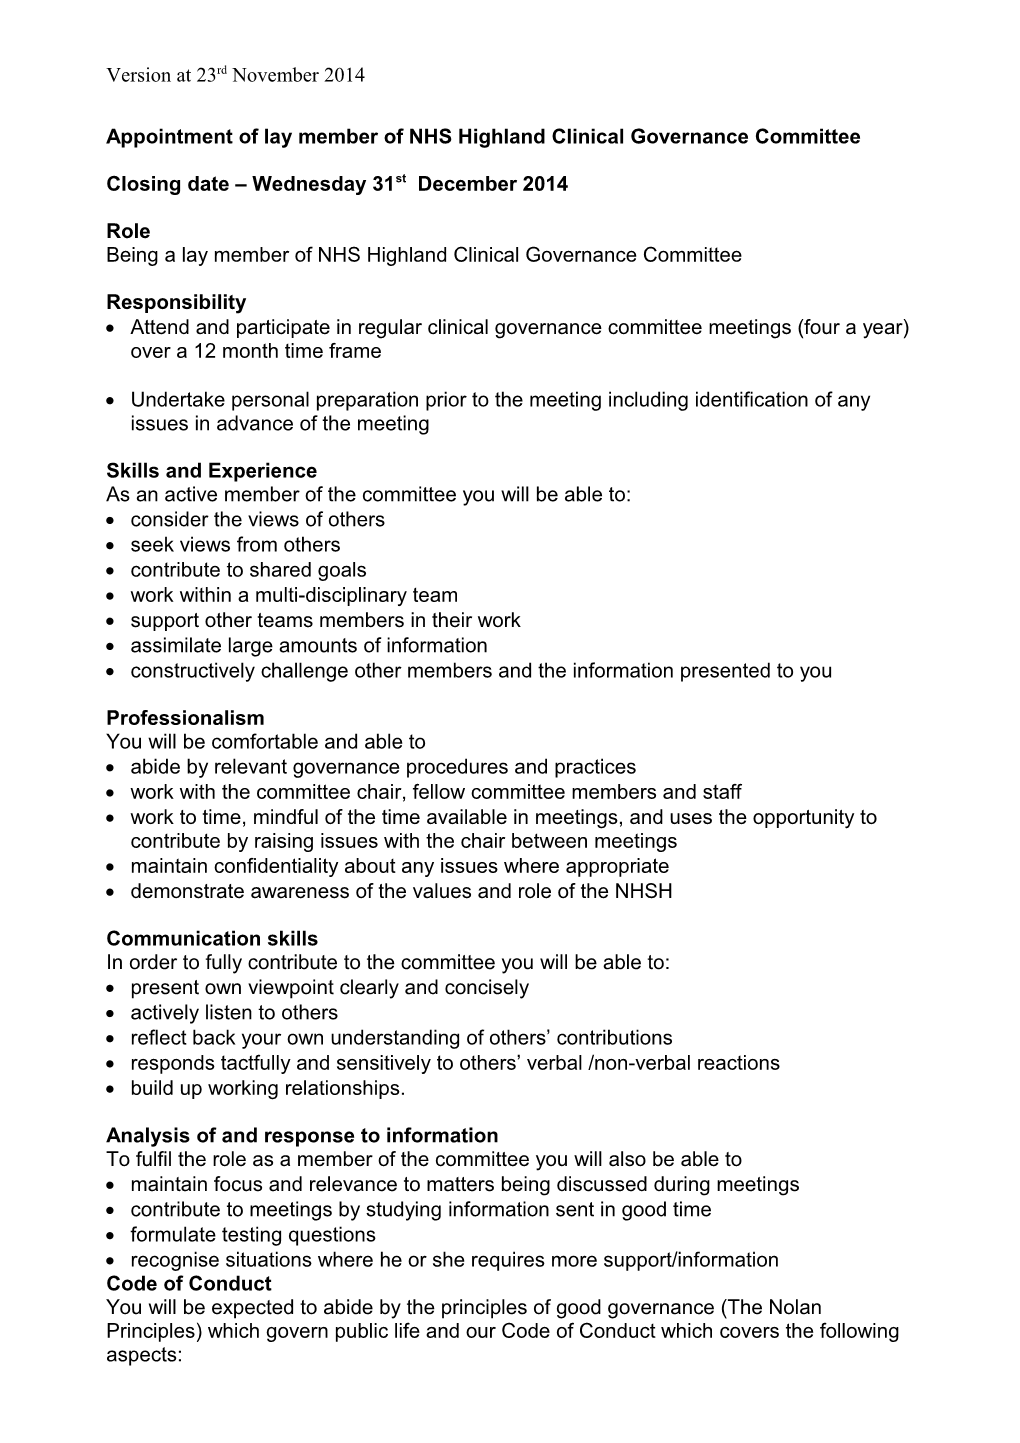 Appointment of Public/Patient Members of NHS Highland Clinical Governance Committee